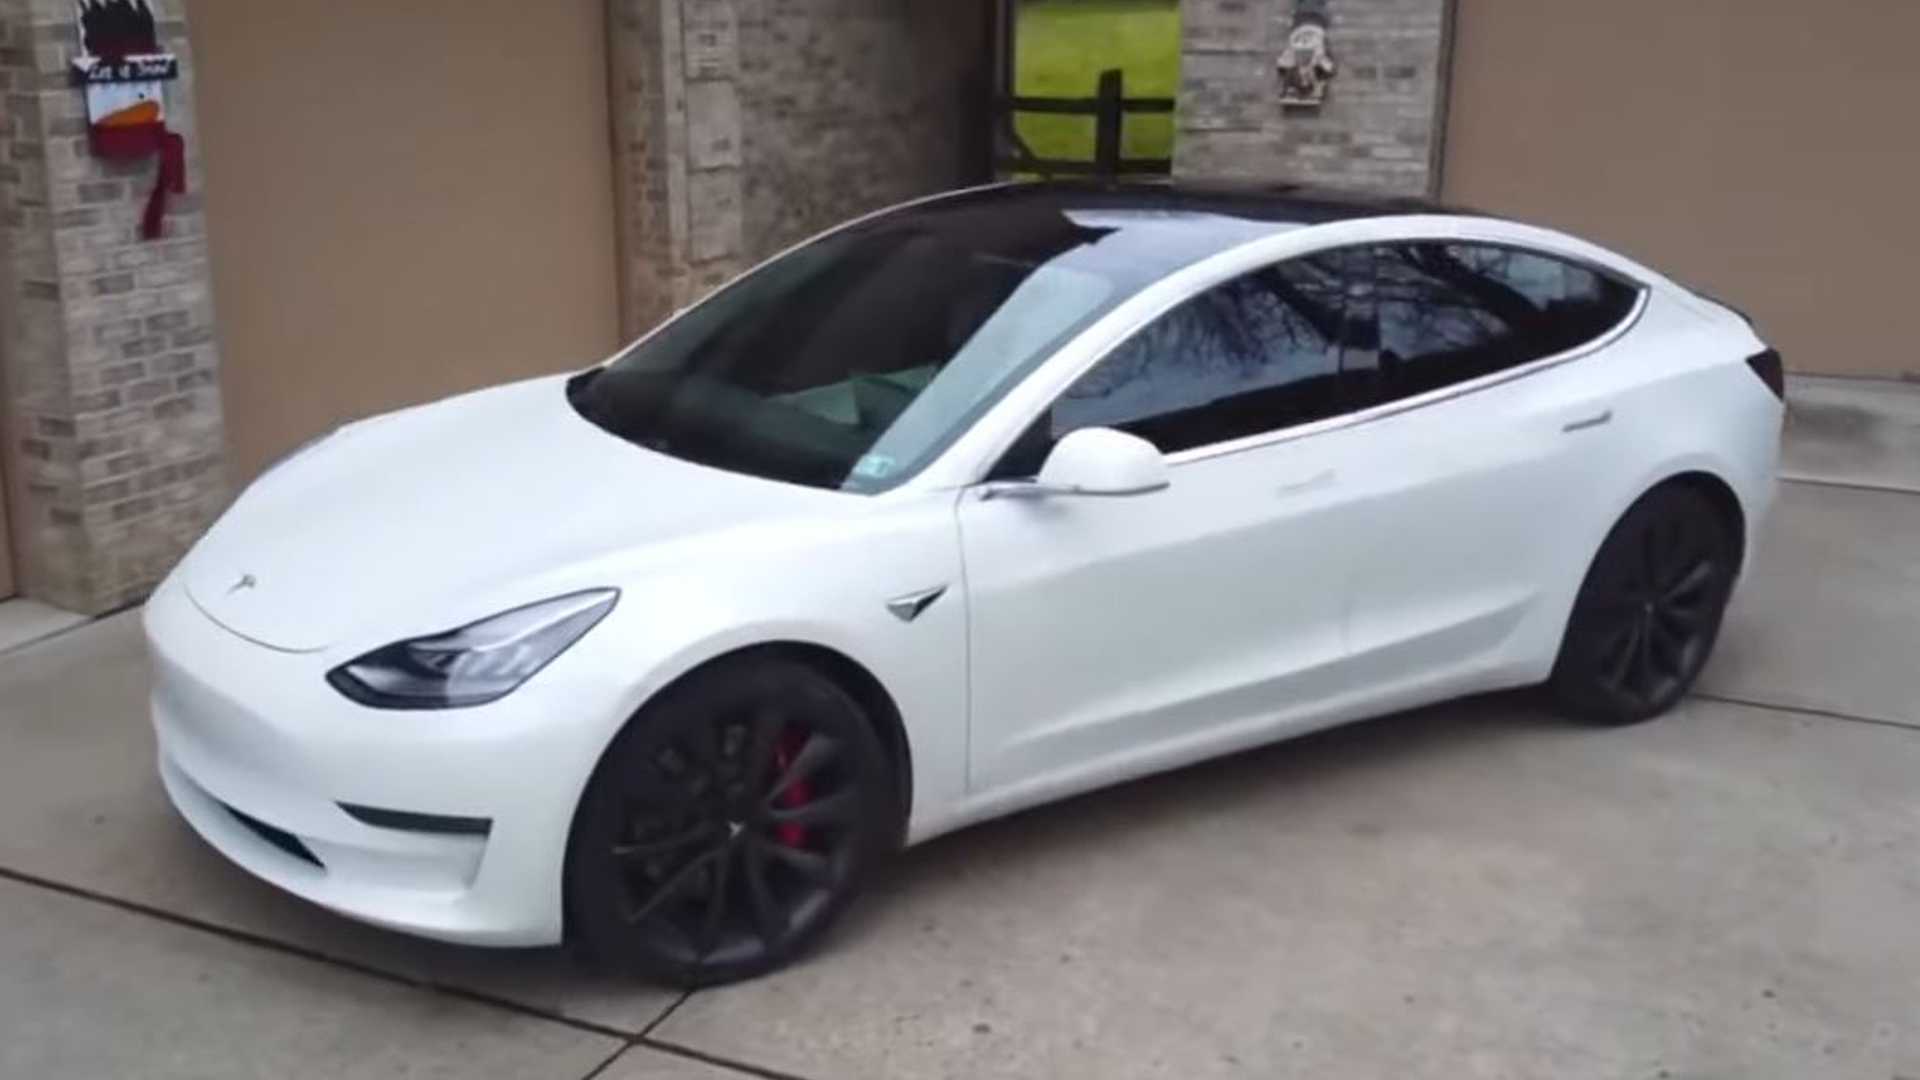 A Sudden Increase in Tesla s Model 3 and Model Y Prices Due to Chip Shortages The NYC Journal